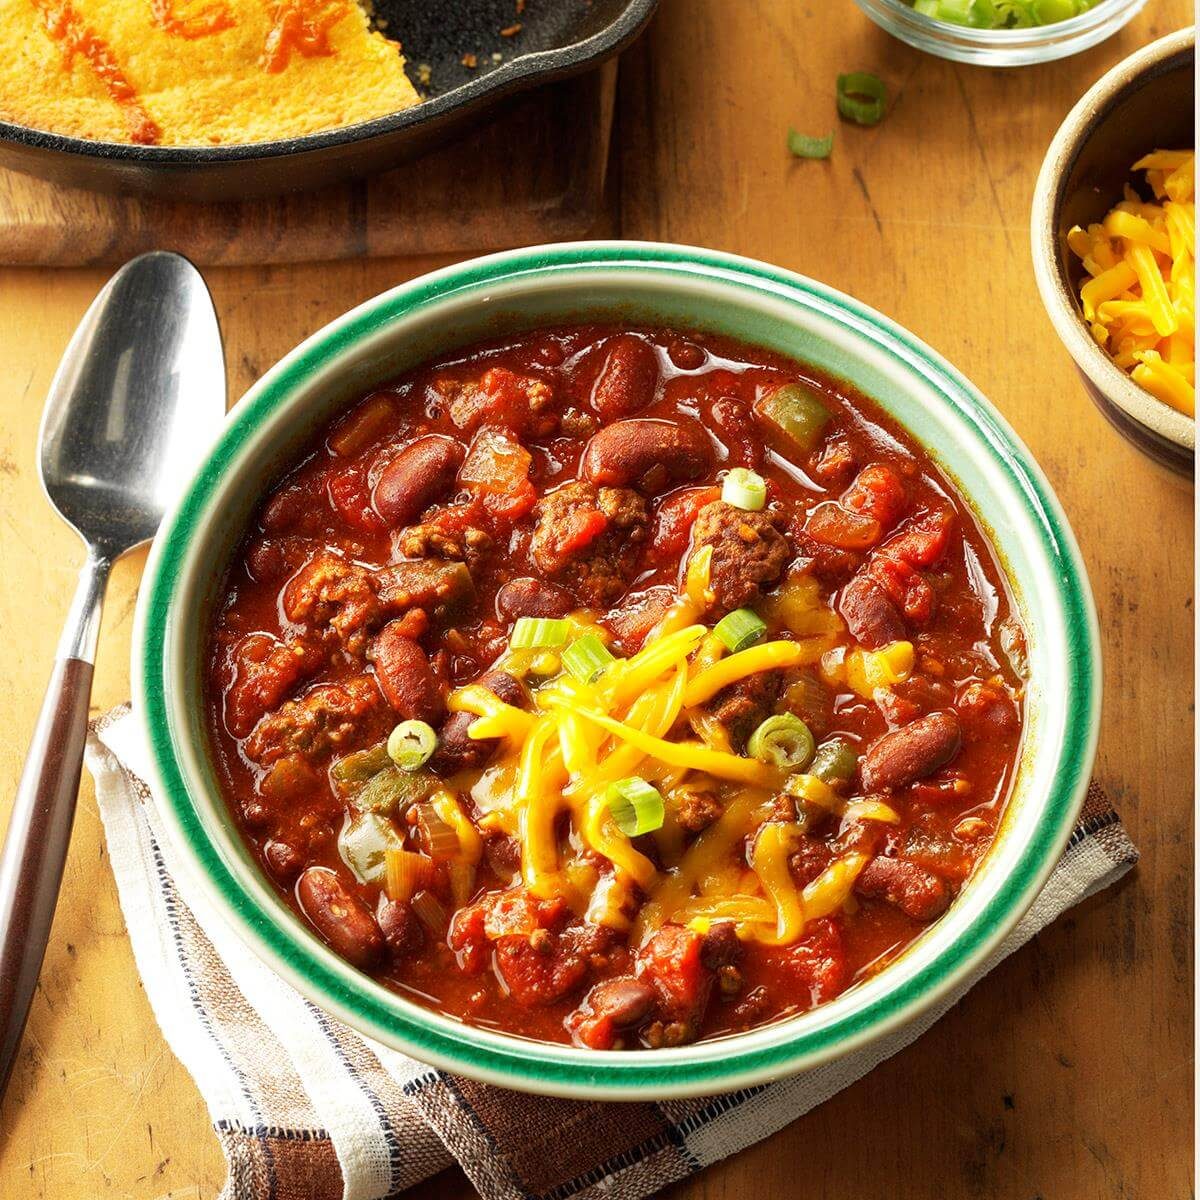 Top 10 Chili Recipes | Taste of Home